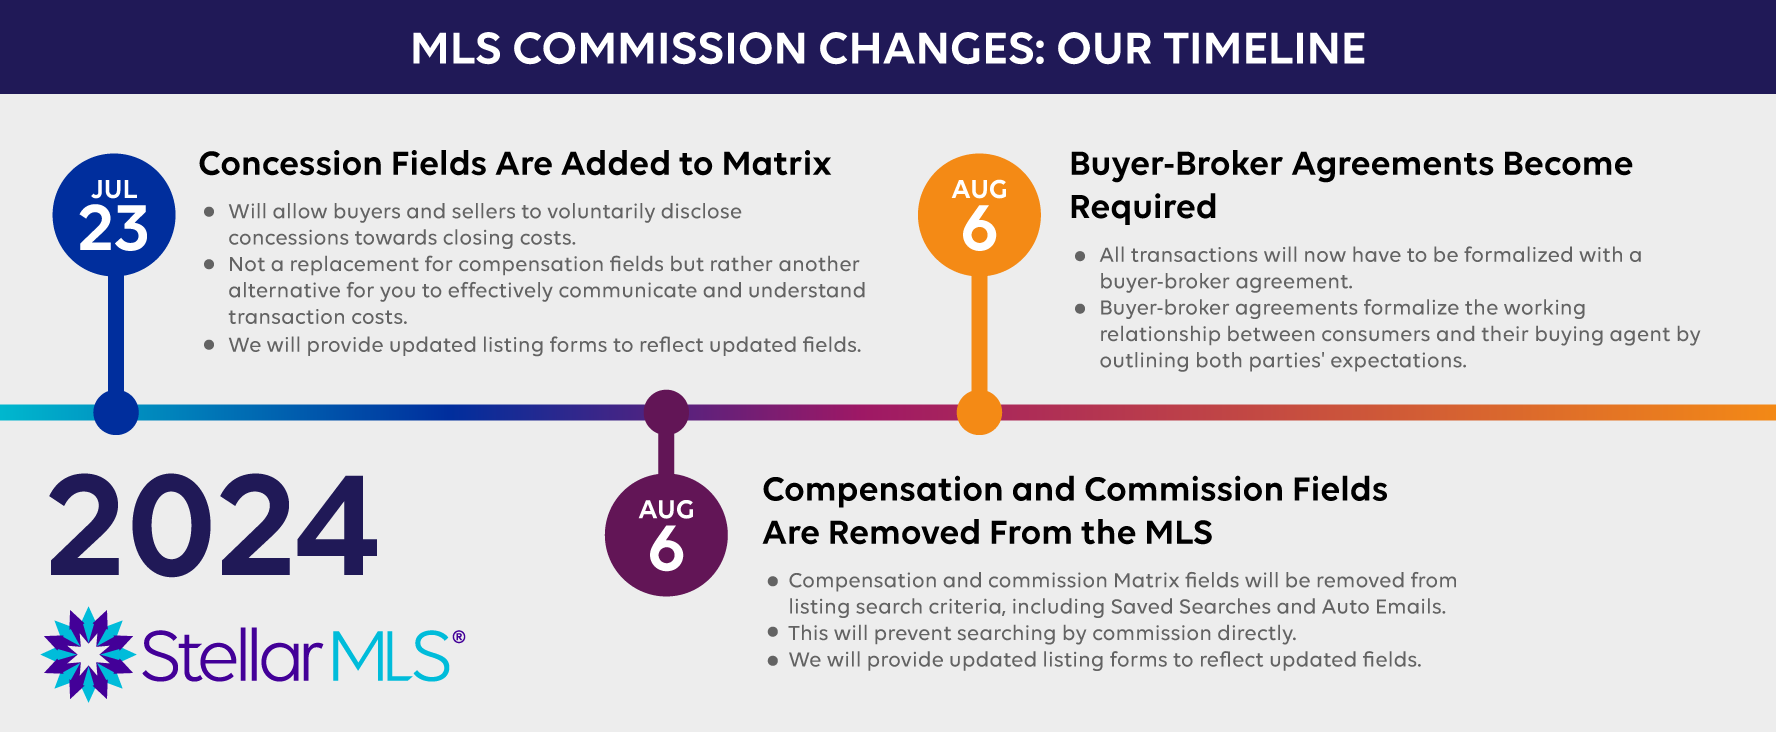 MLS Commission Changes: Our Timeline